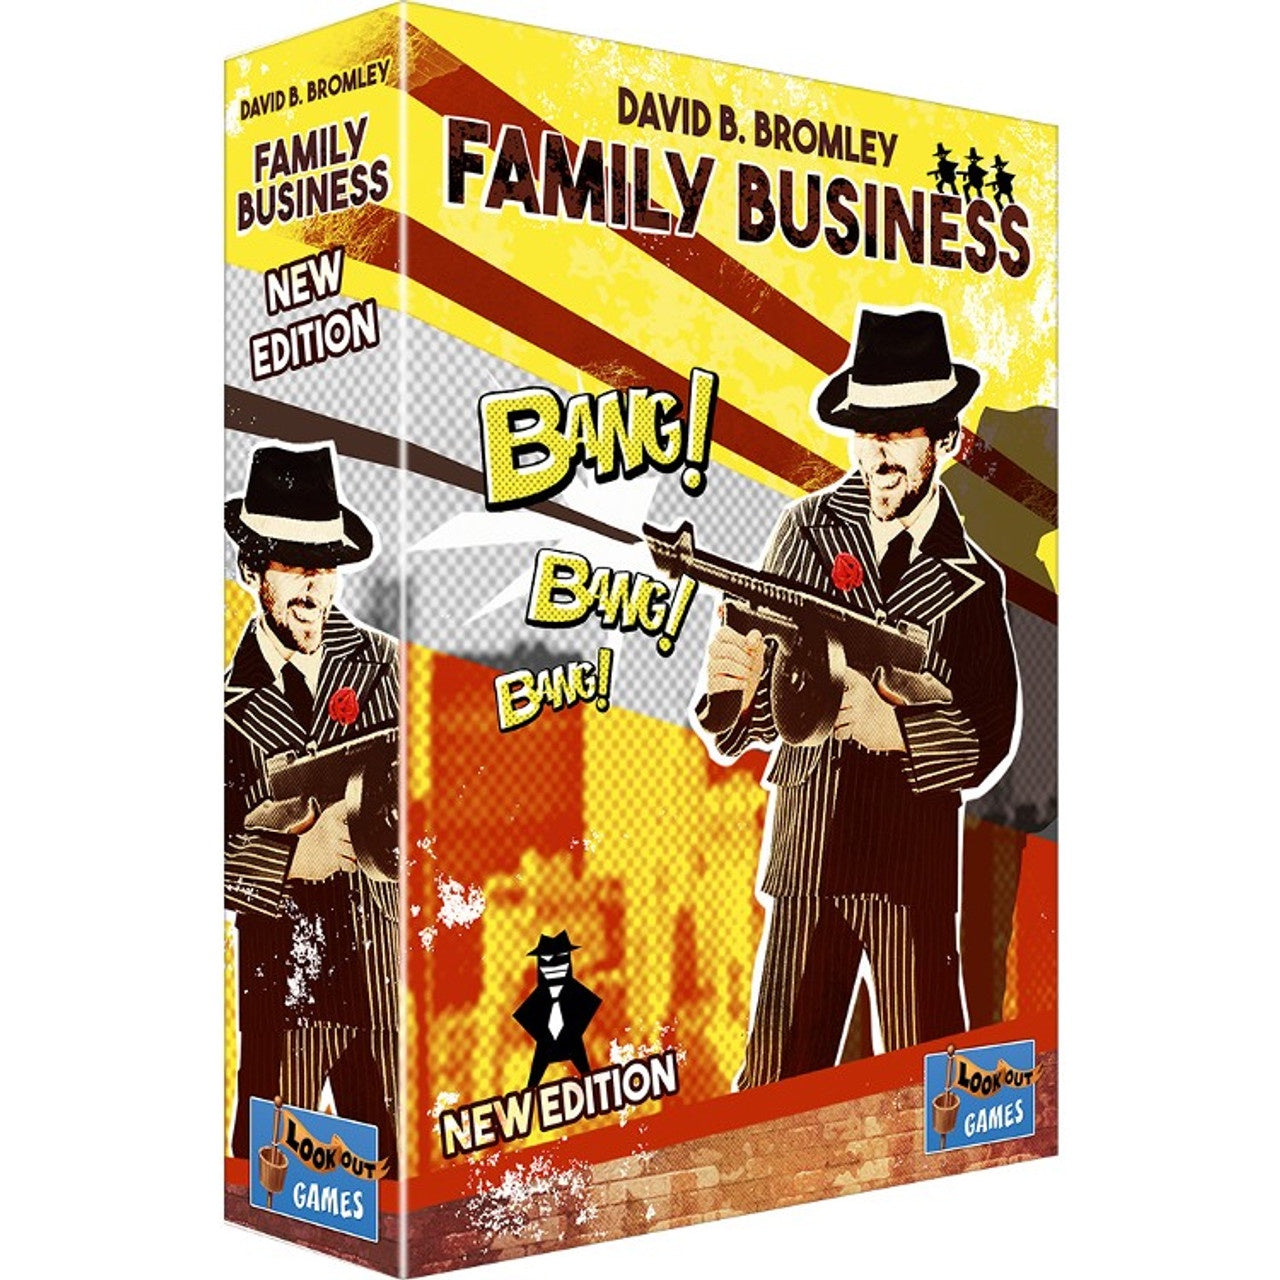 FAMILY BUSINESS (NEW EDITION)